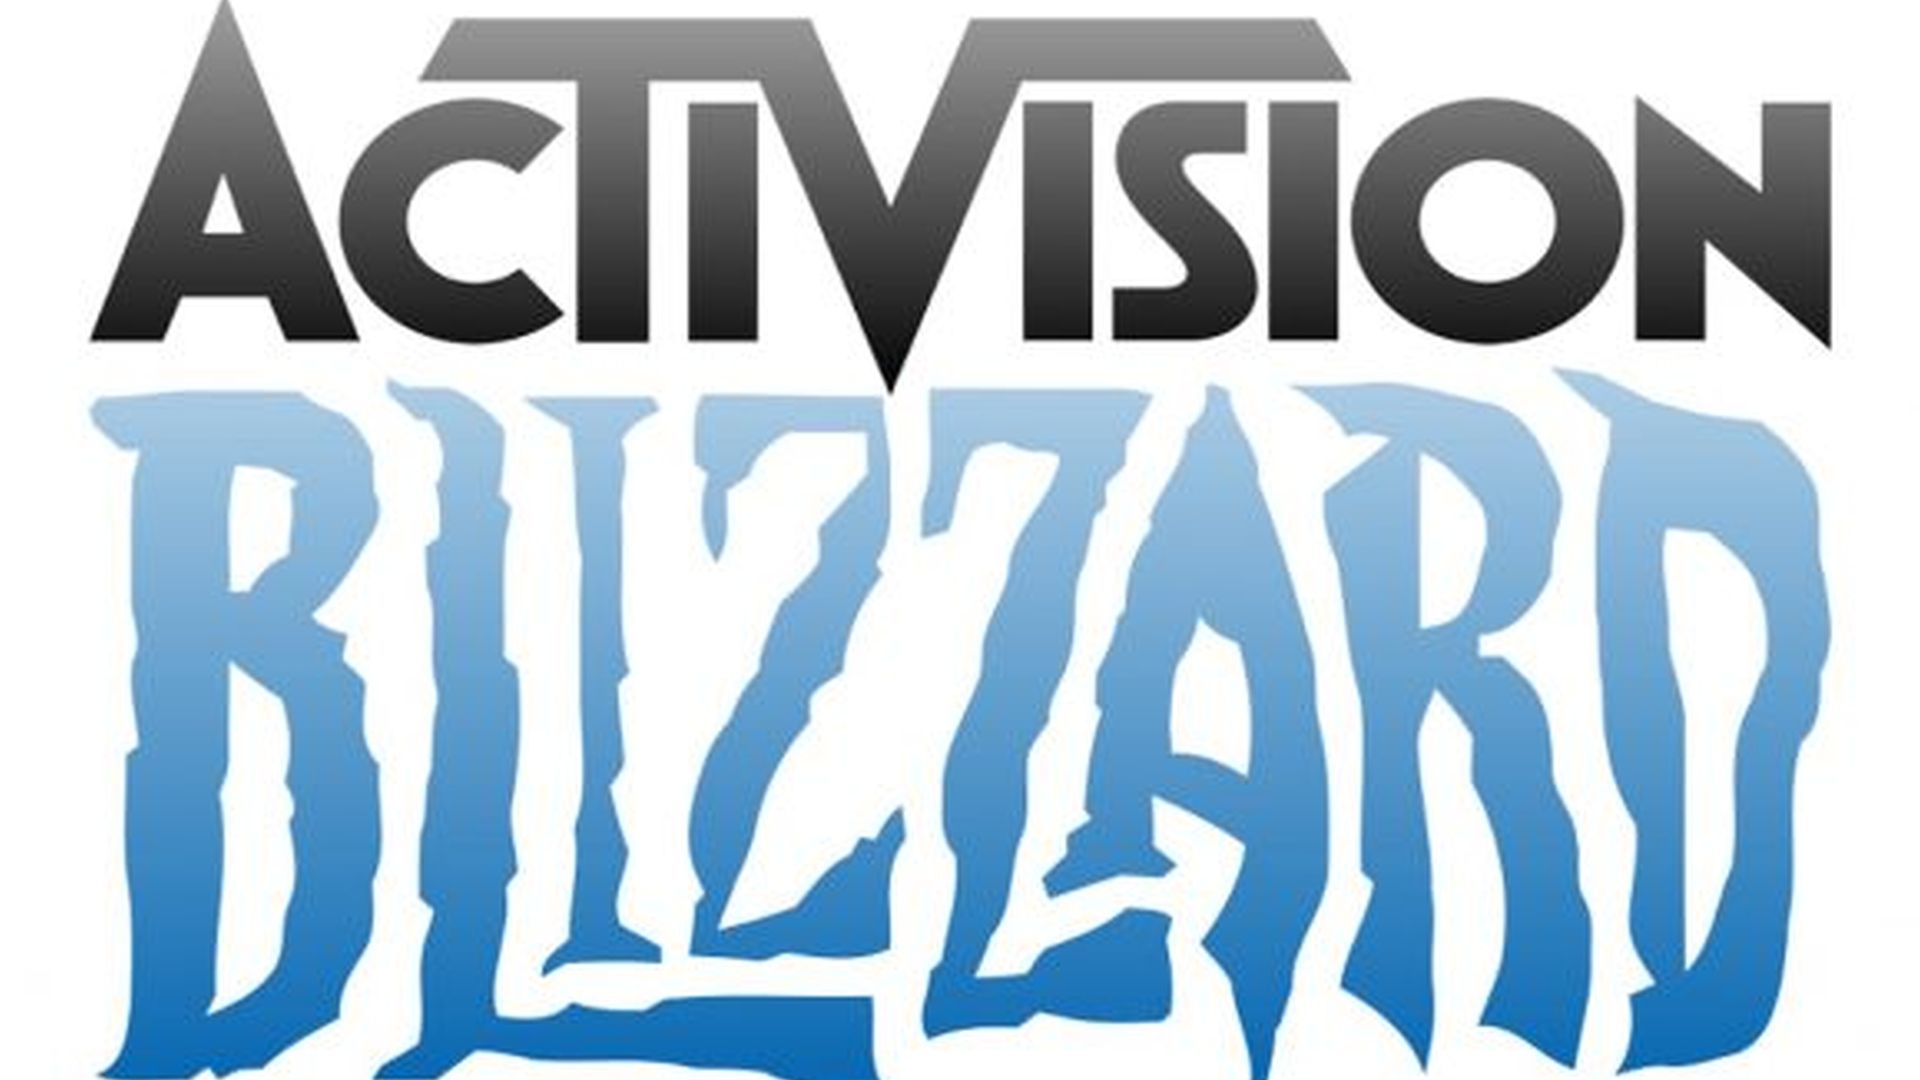 The ABK Workers Alliance demands change at Activision Blizzard